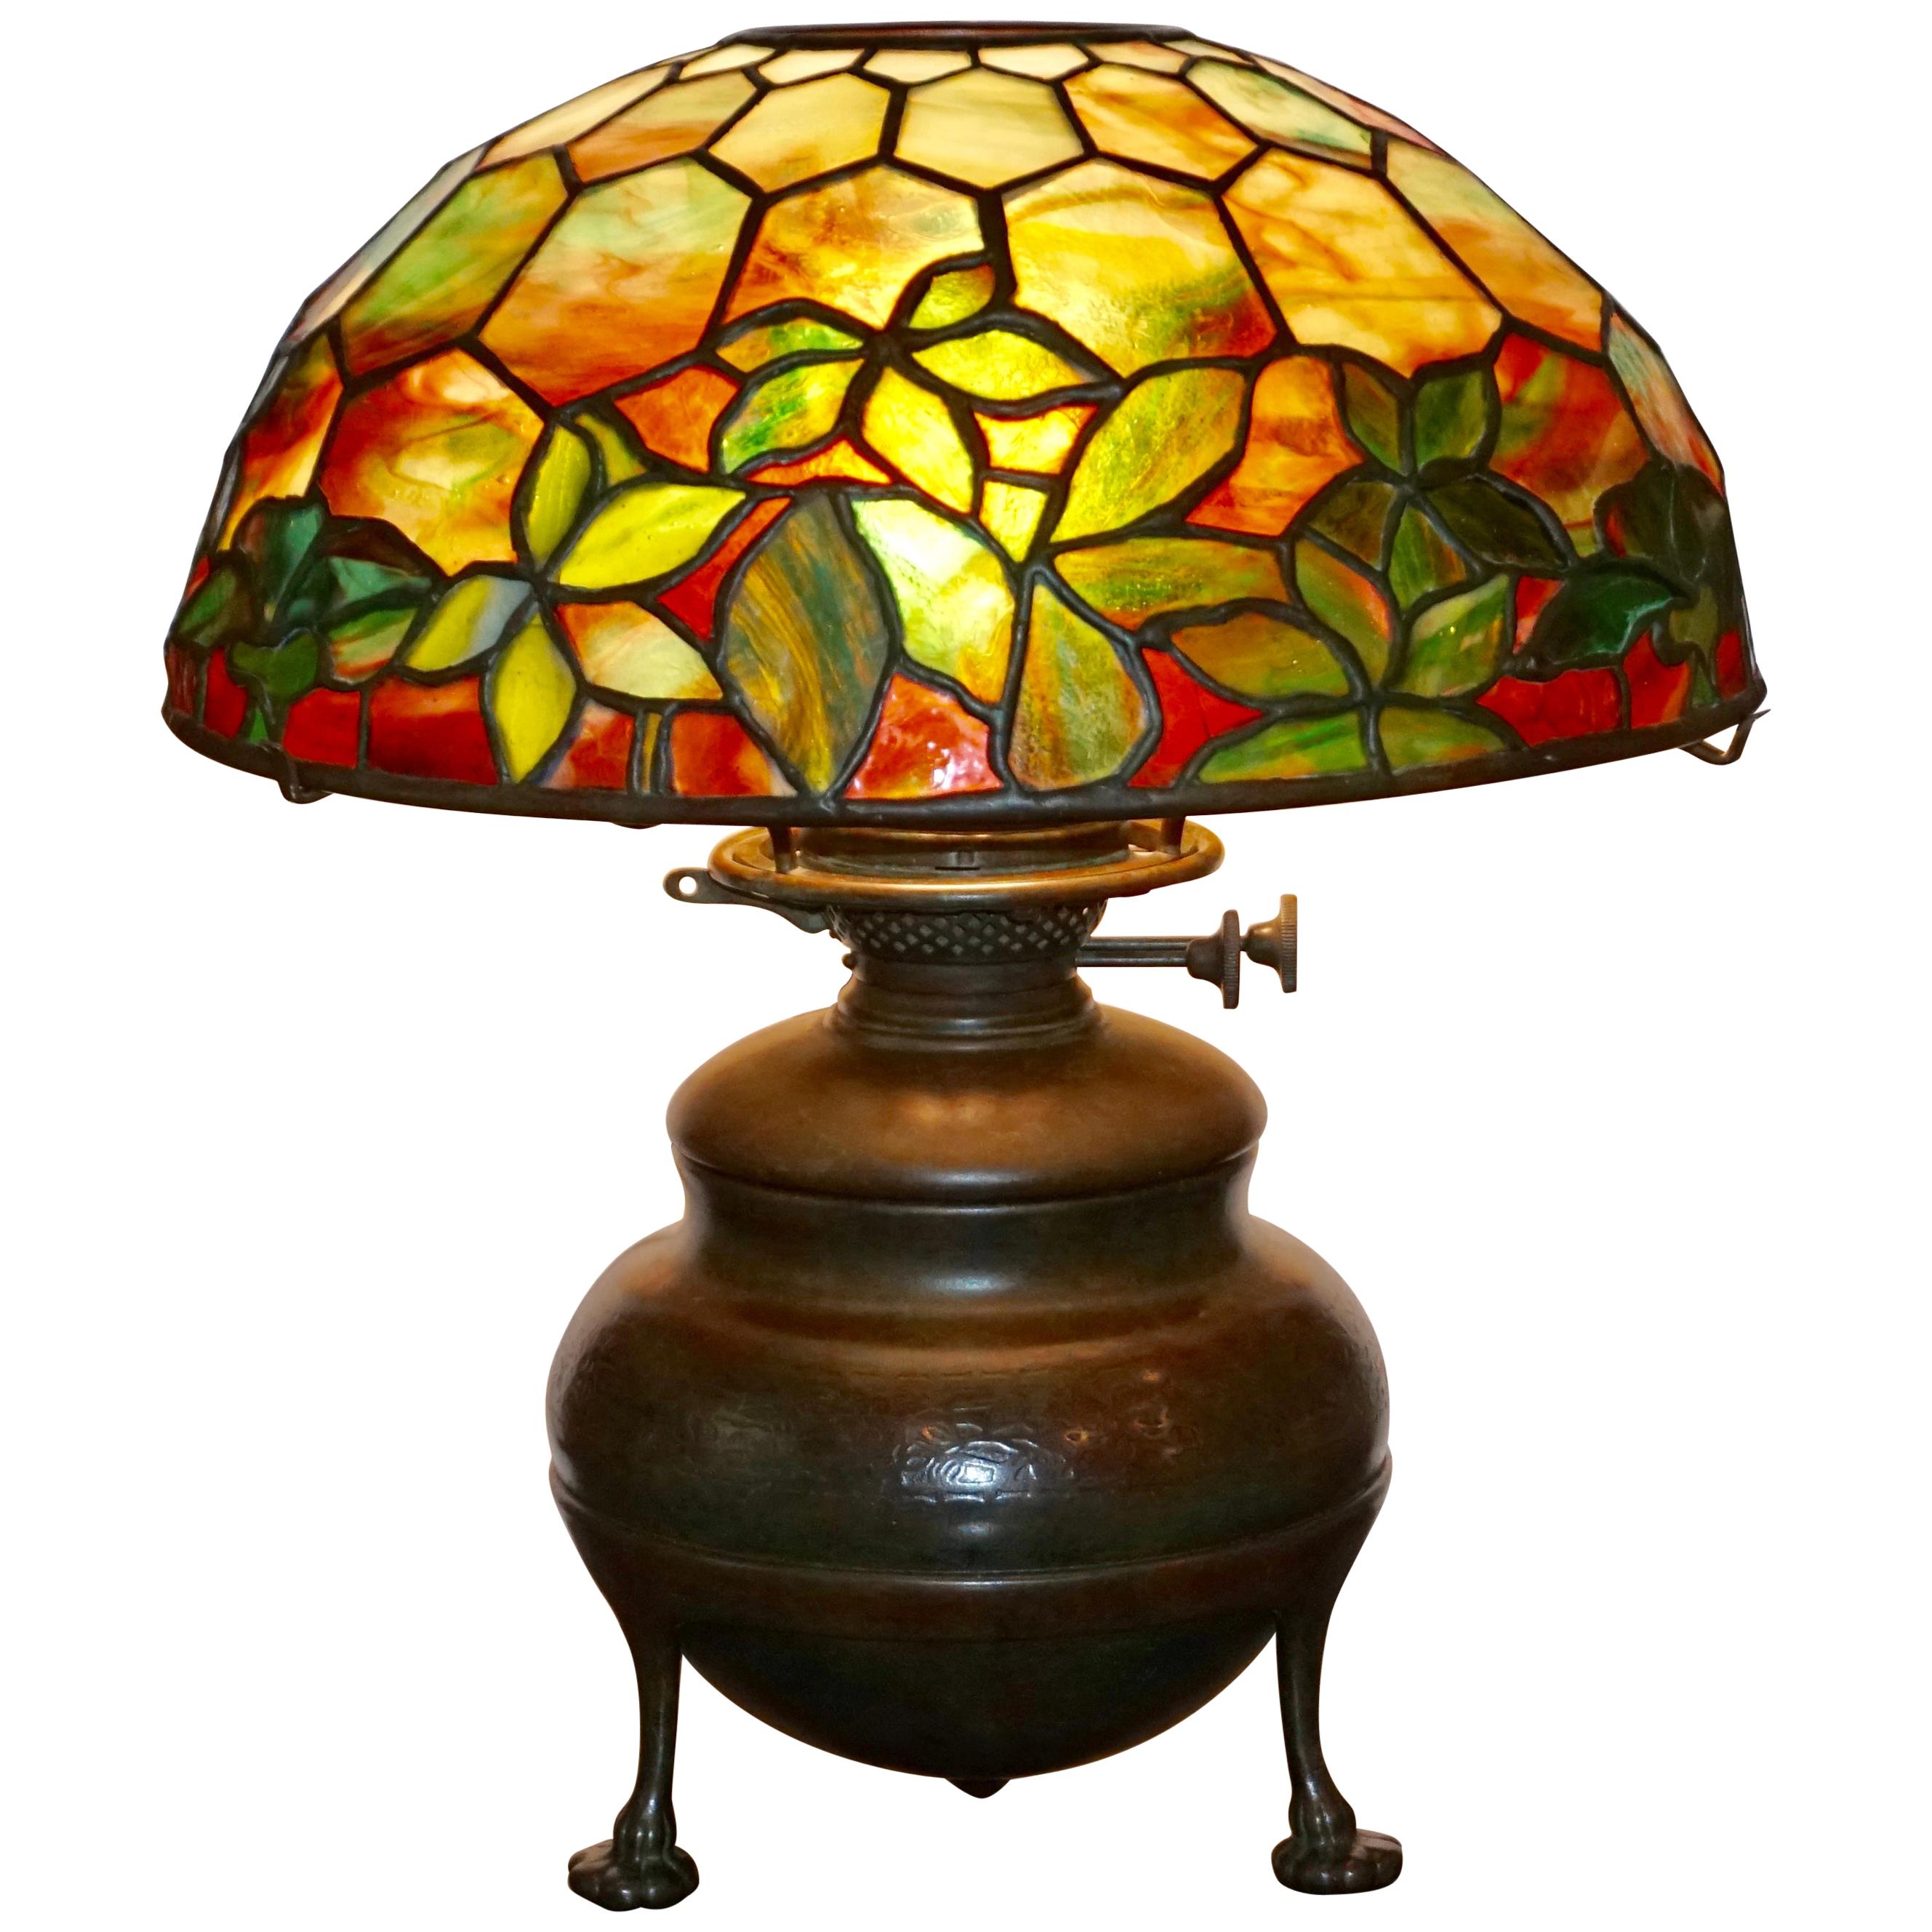 Tiffany Stained Glass Lamps - 6 For Sale on 1stDibs | art nouveau 